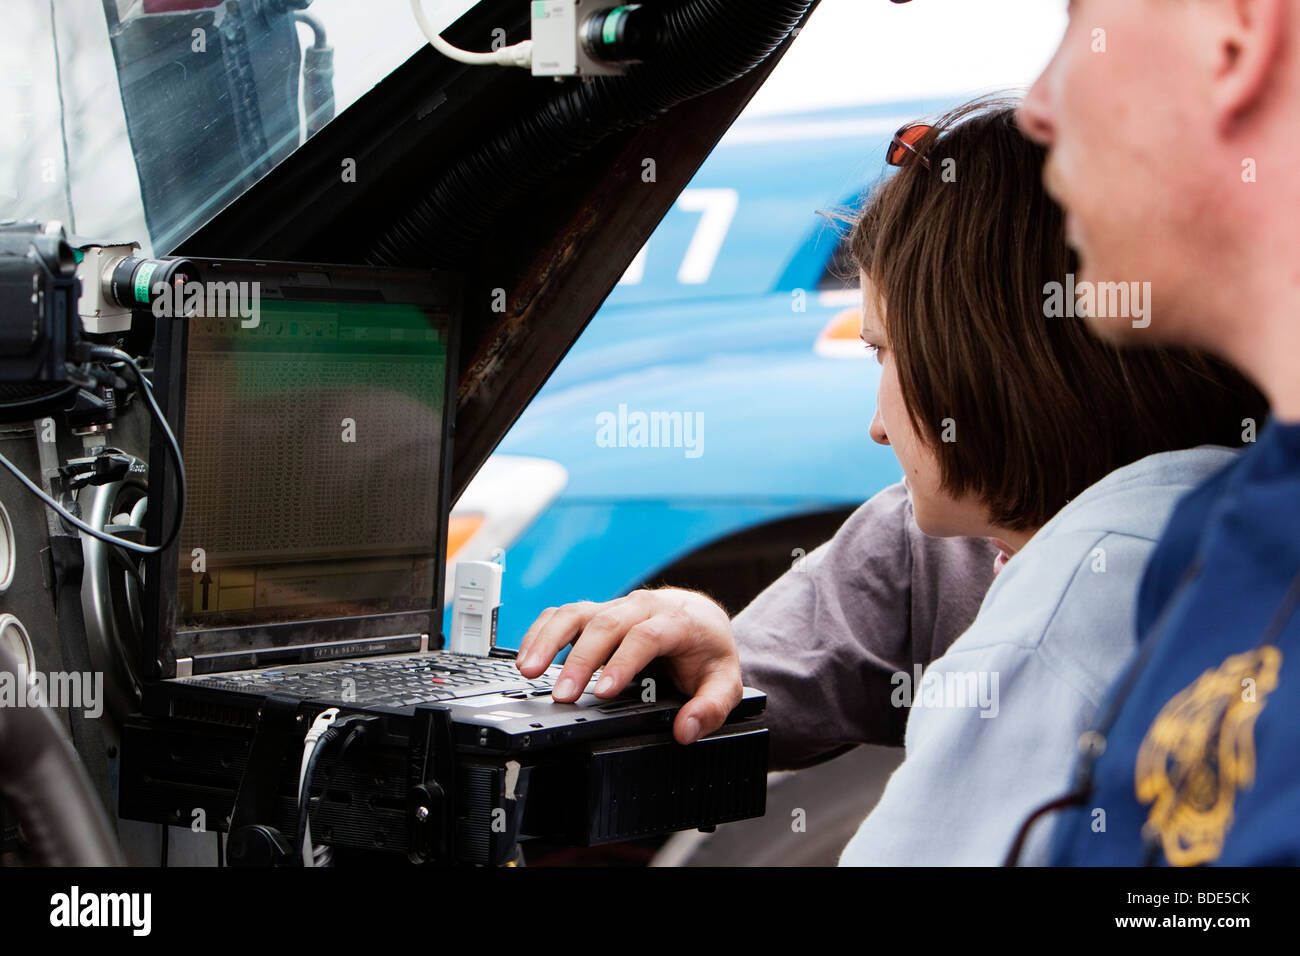 Researchers check a laptop for information during Project Vortex 2 in Kimball, Nebraska, USA, June 5, 2009. Stock Photo